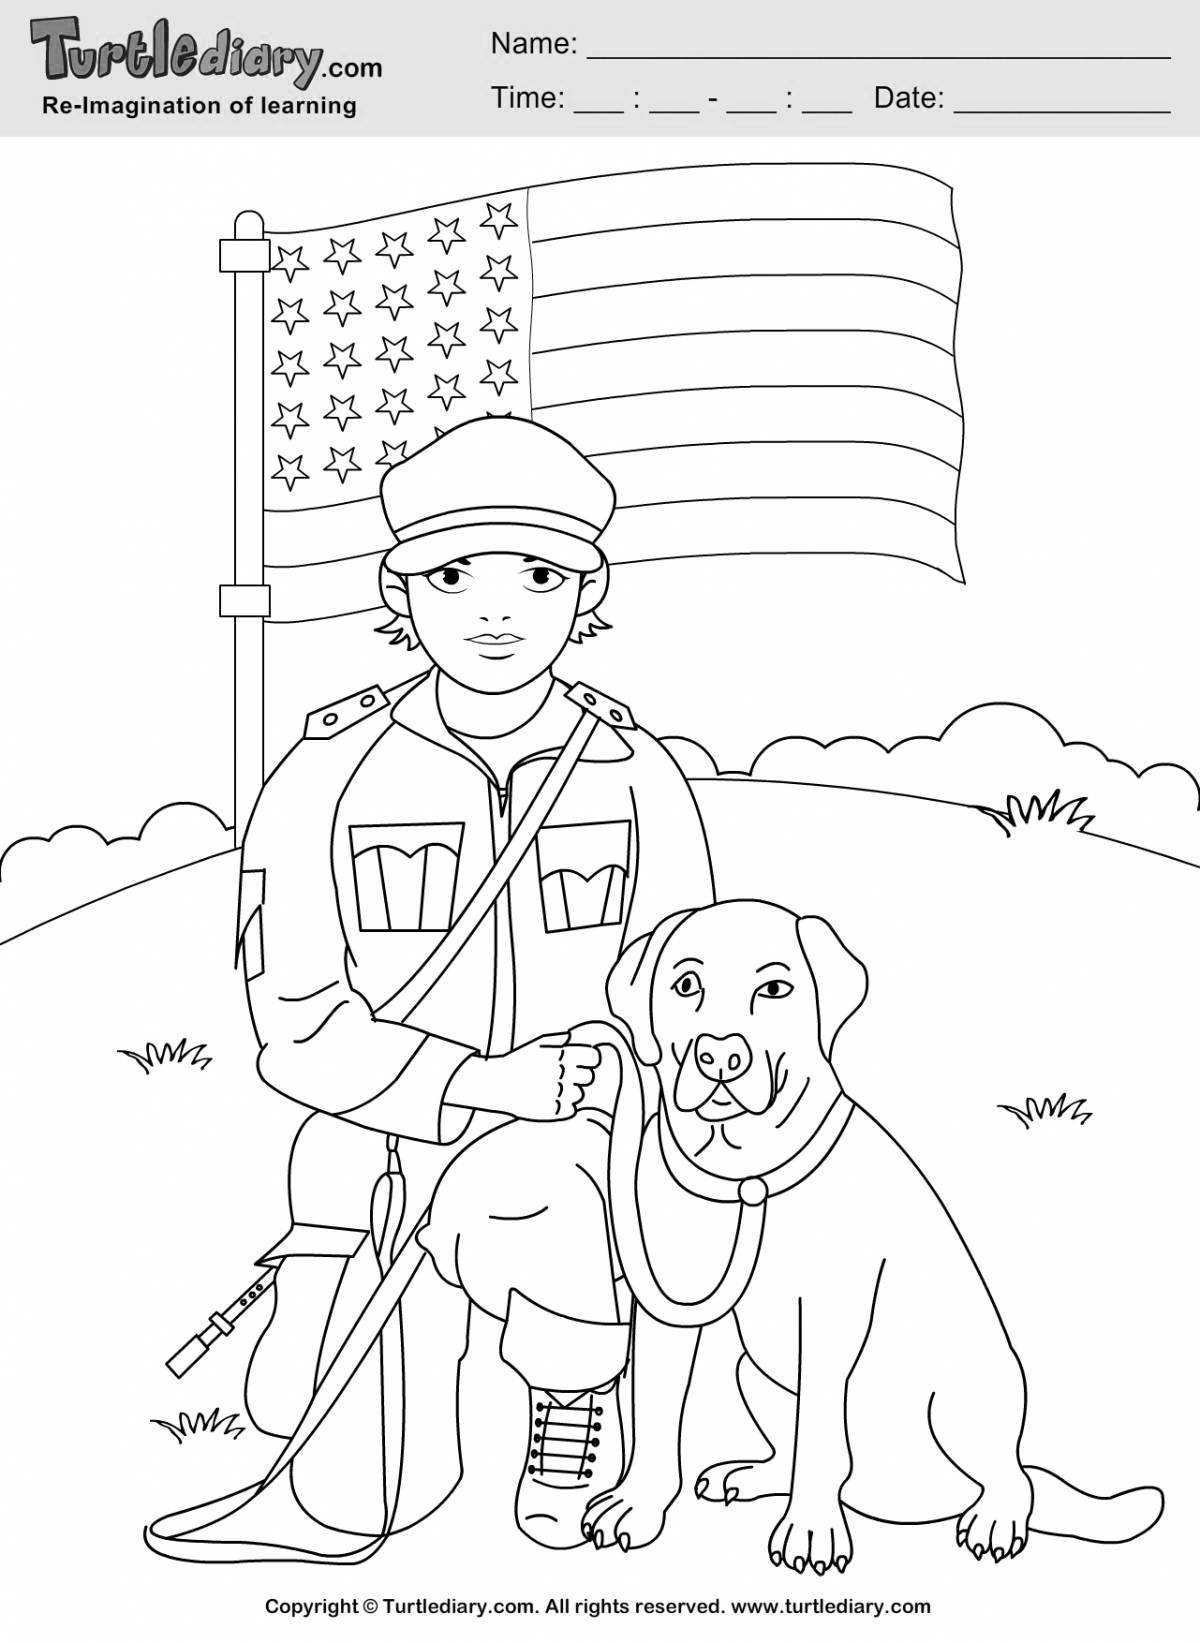 Steady border guard with a dog